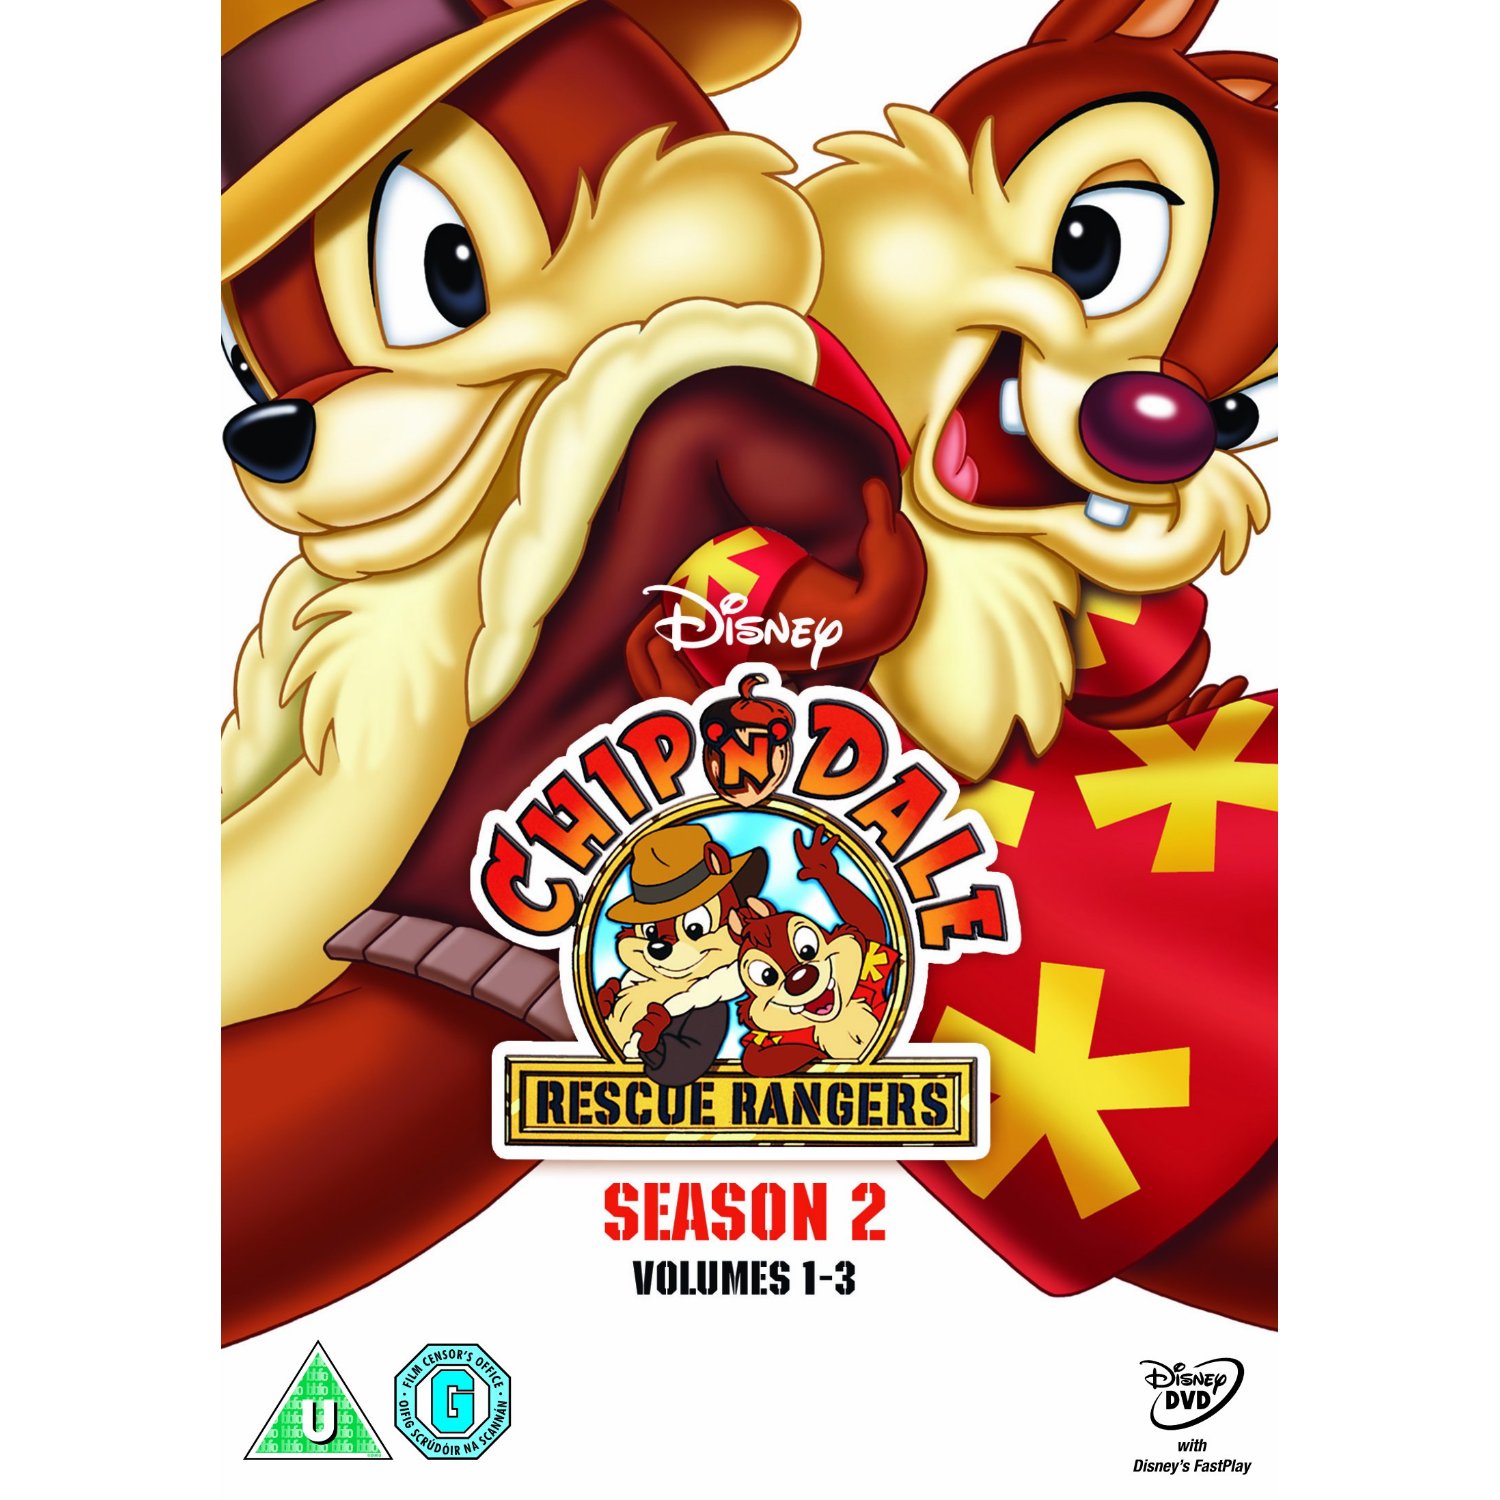 Chip 'n Dale Rescue Rangers #24